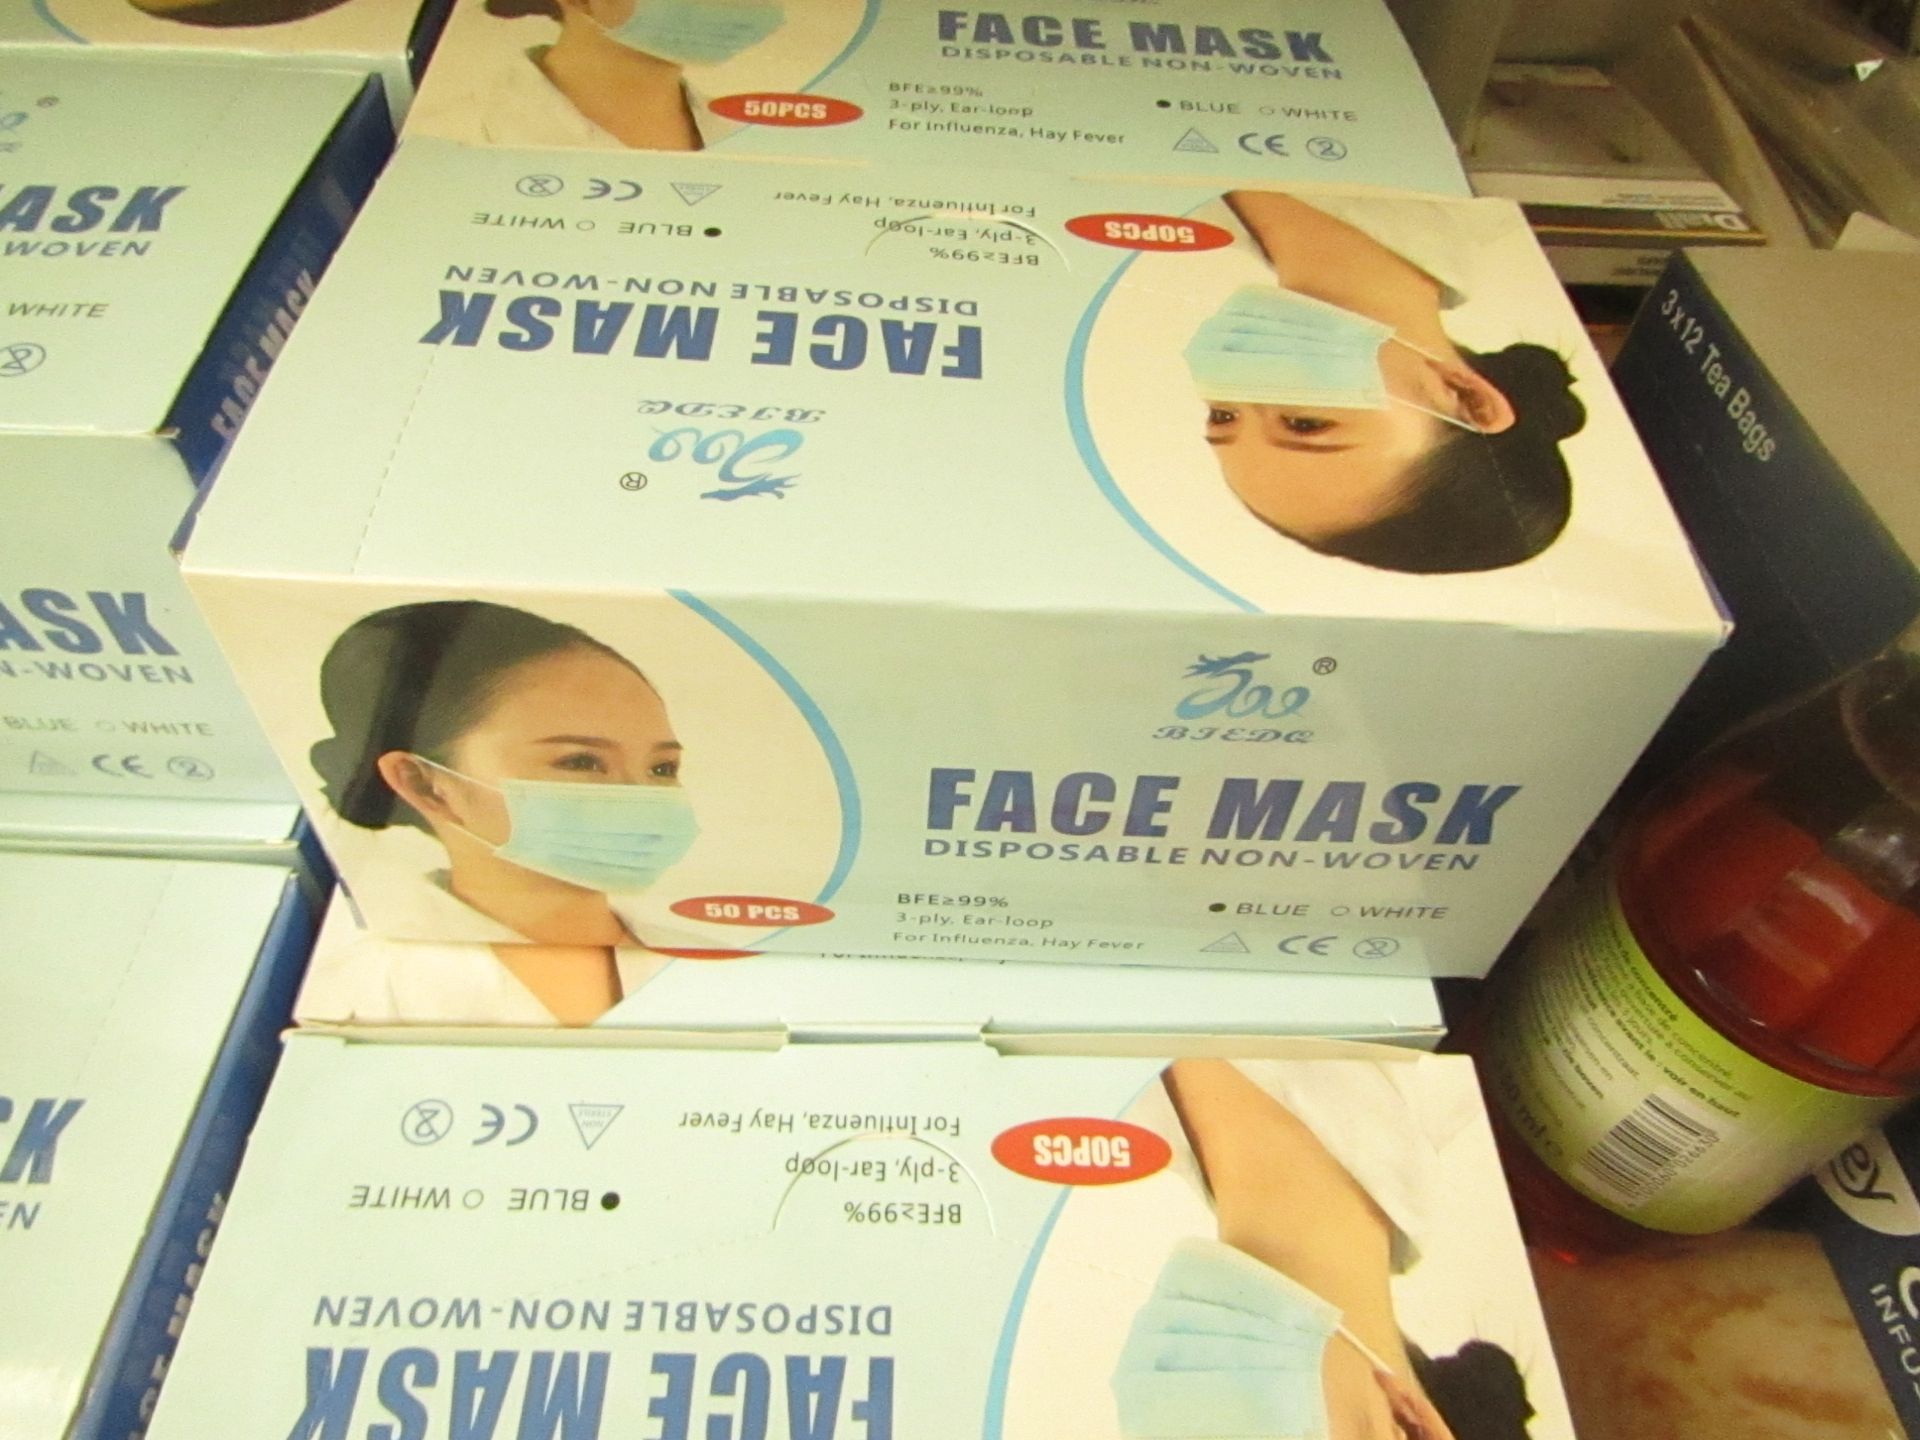 2x Boxes Containing 50 Disposable Non-Woven Face Mask's - New & Boxed.